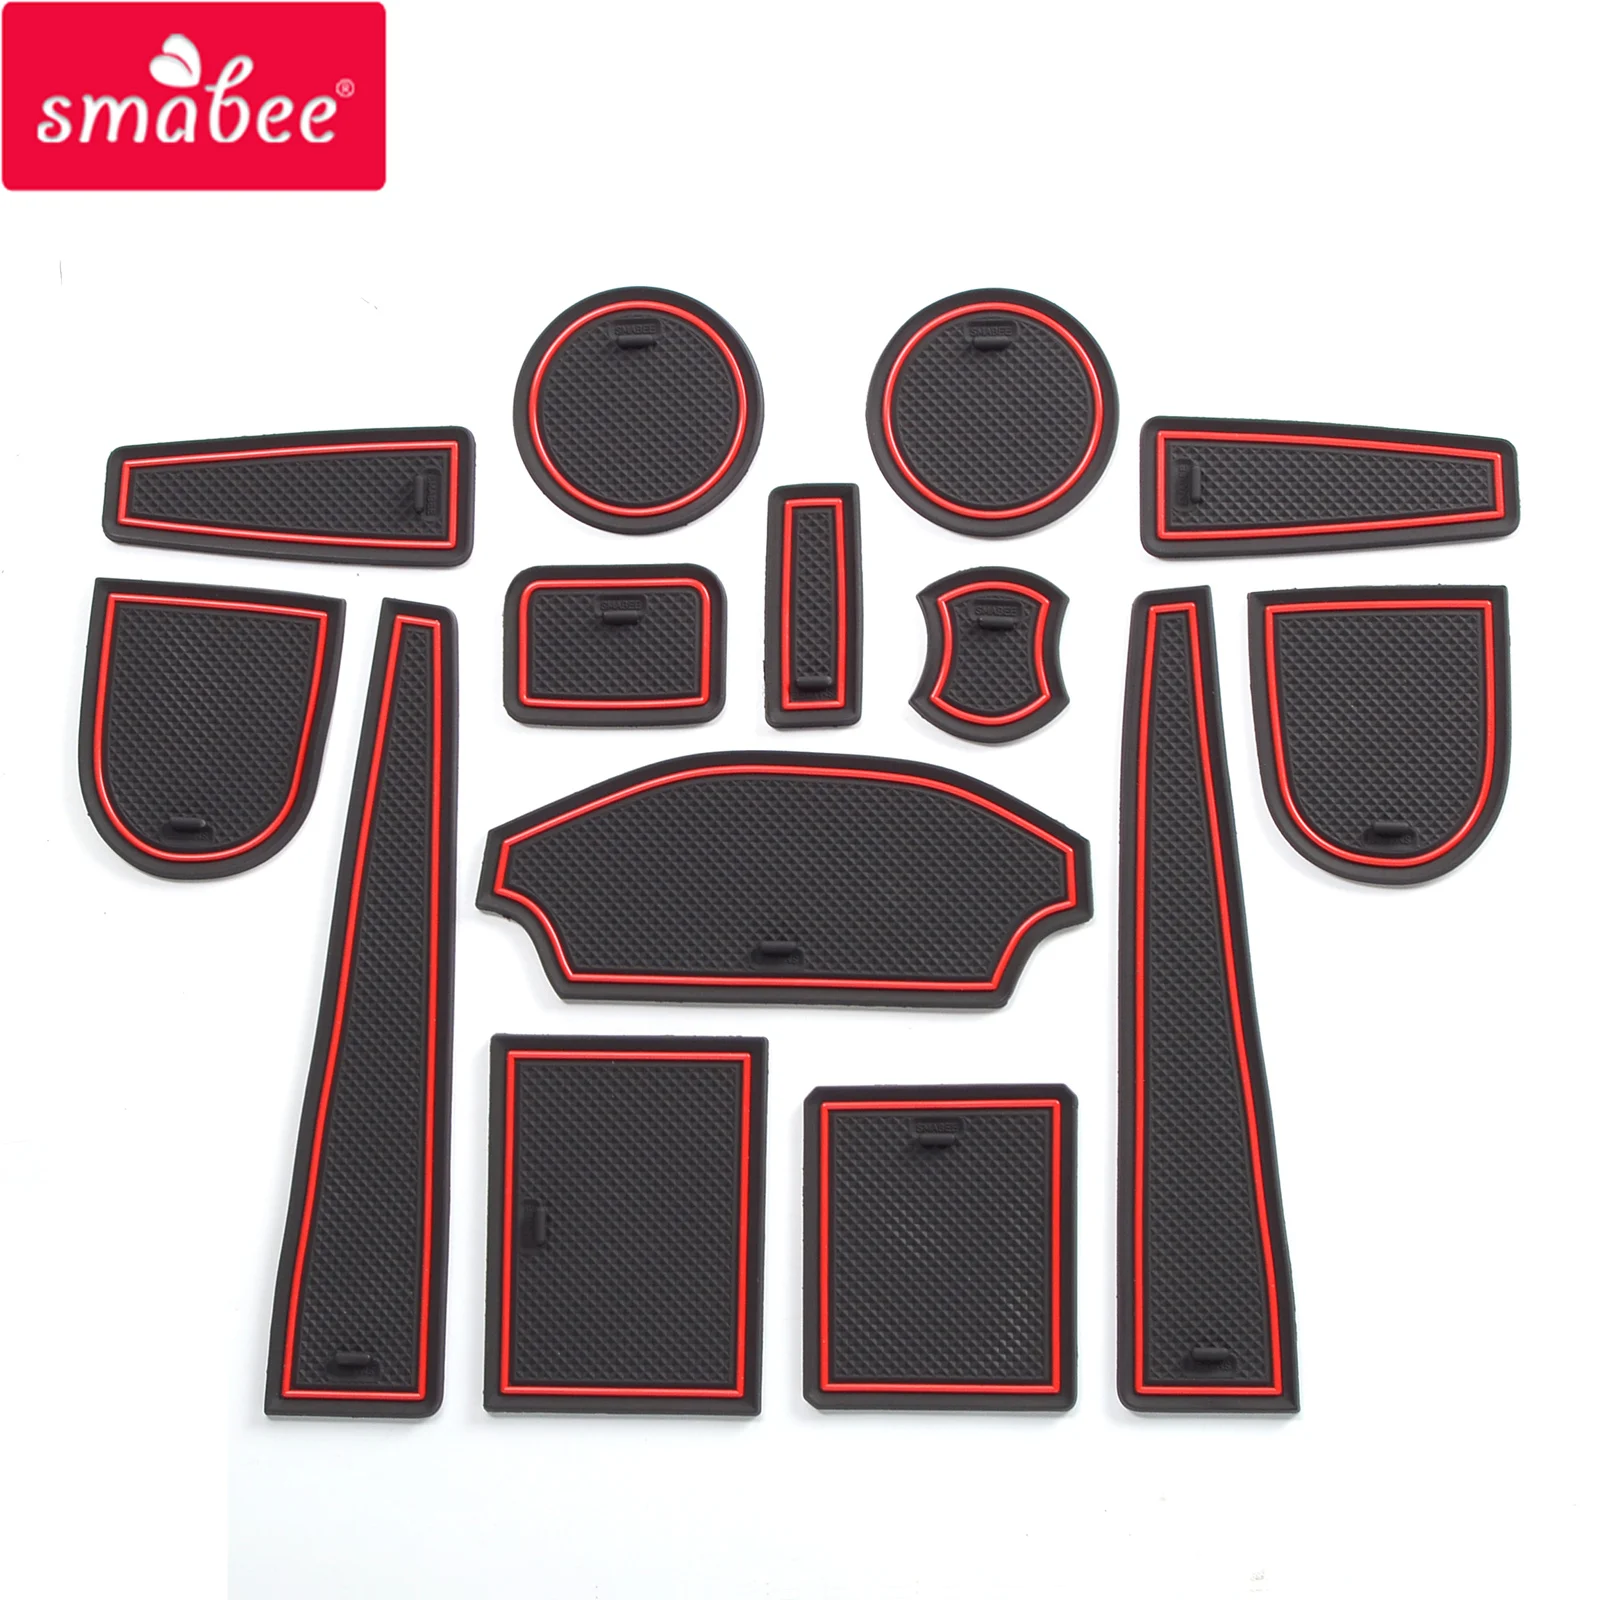 

Smabee Anti-Slip Gate slot cup mat for Ford Fiesta MK8 ST 2017 2018 2019 2020 Interior Rubber 14pcs Door Pad Accessories